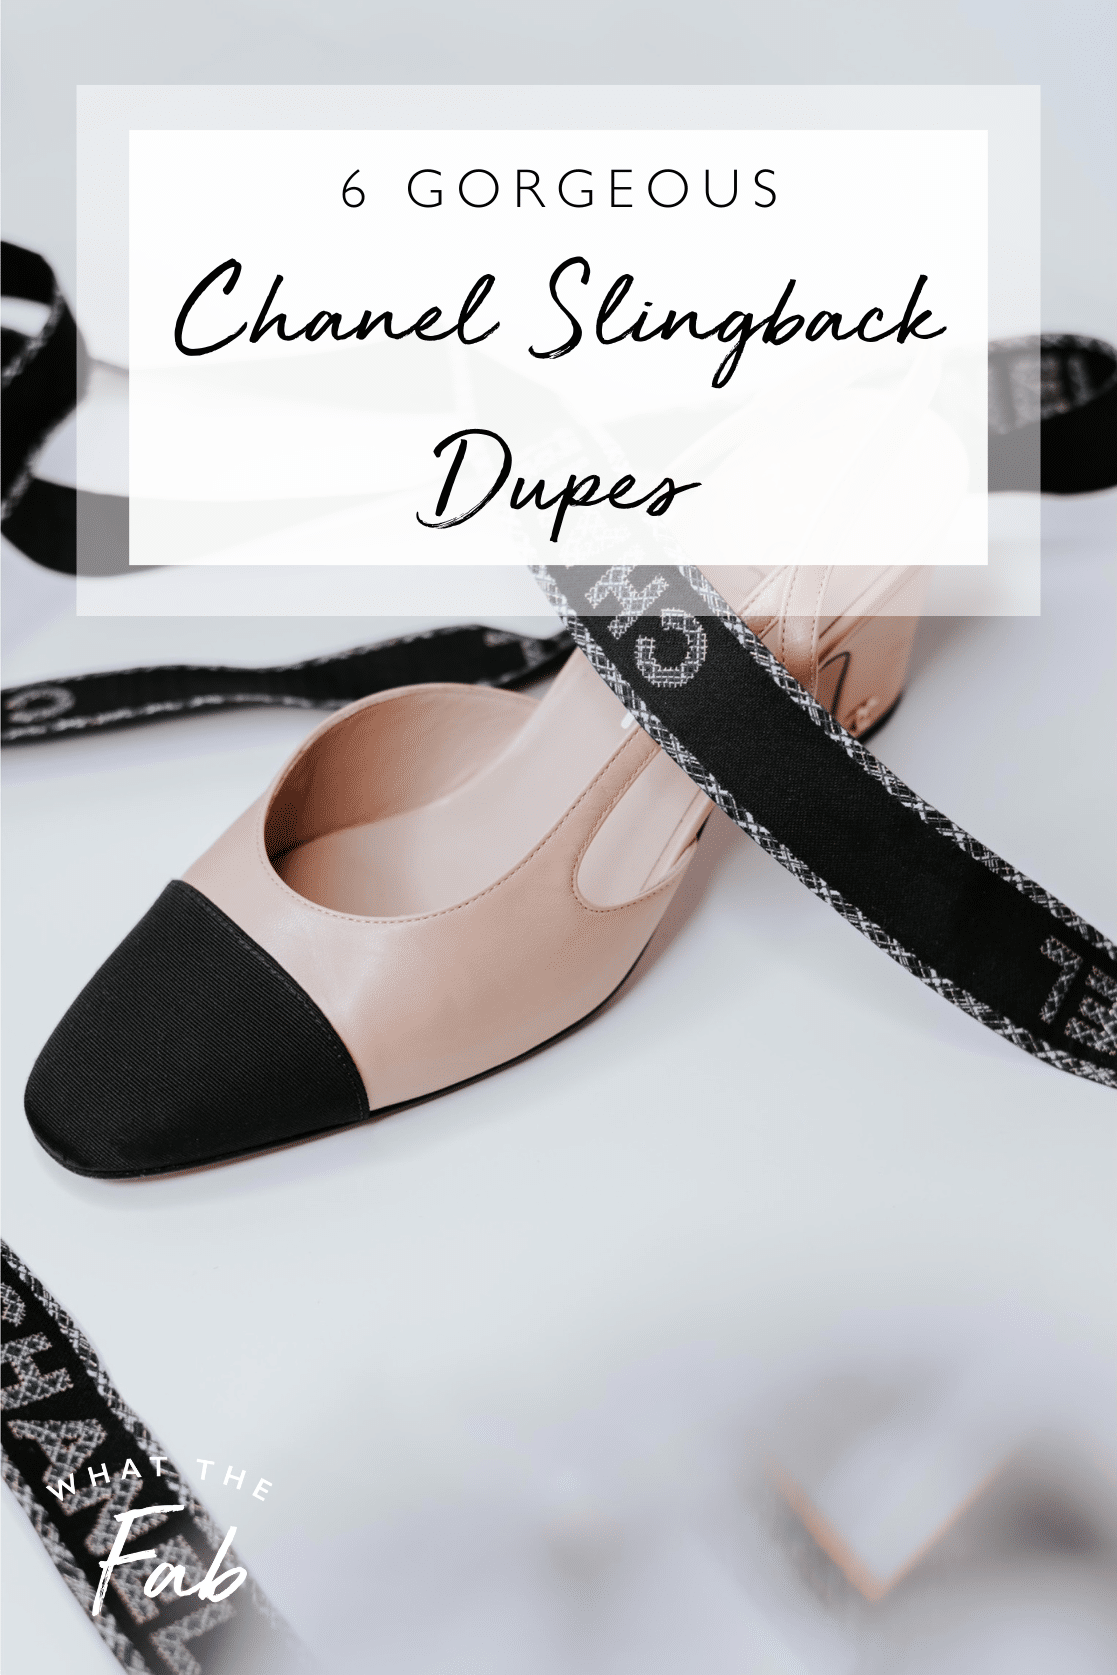 Chanel Slingback Dupes, by Blogger What The Fab